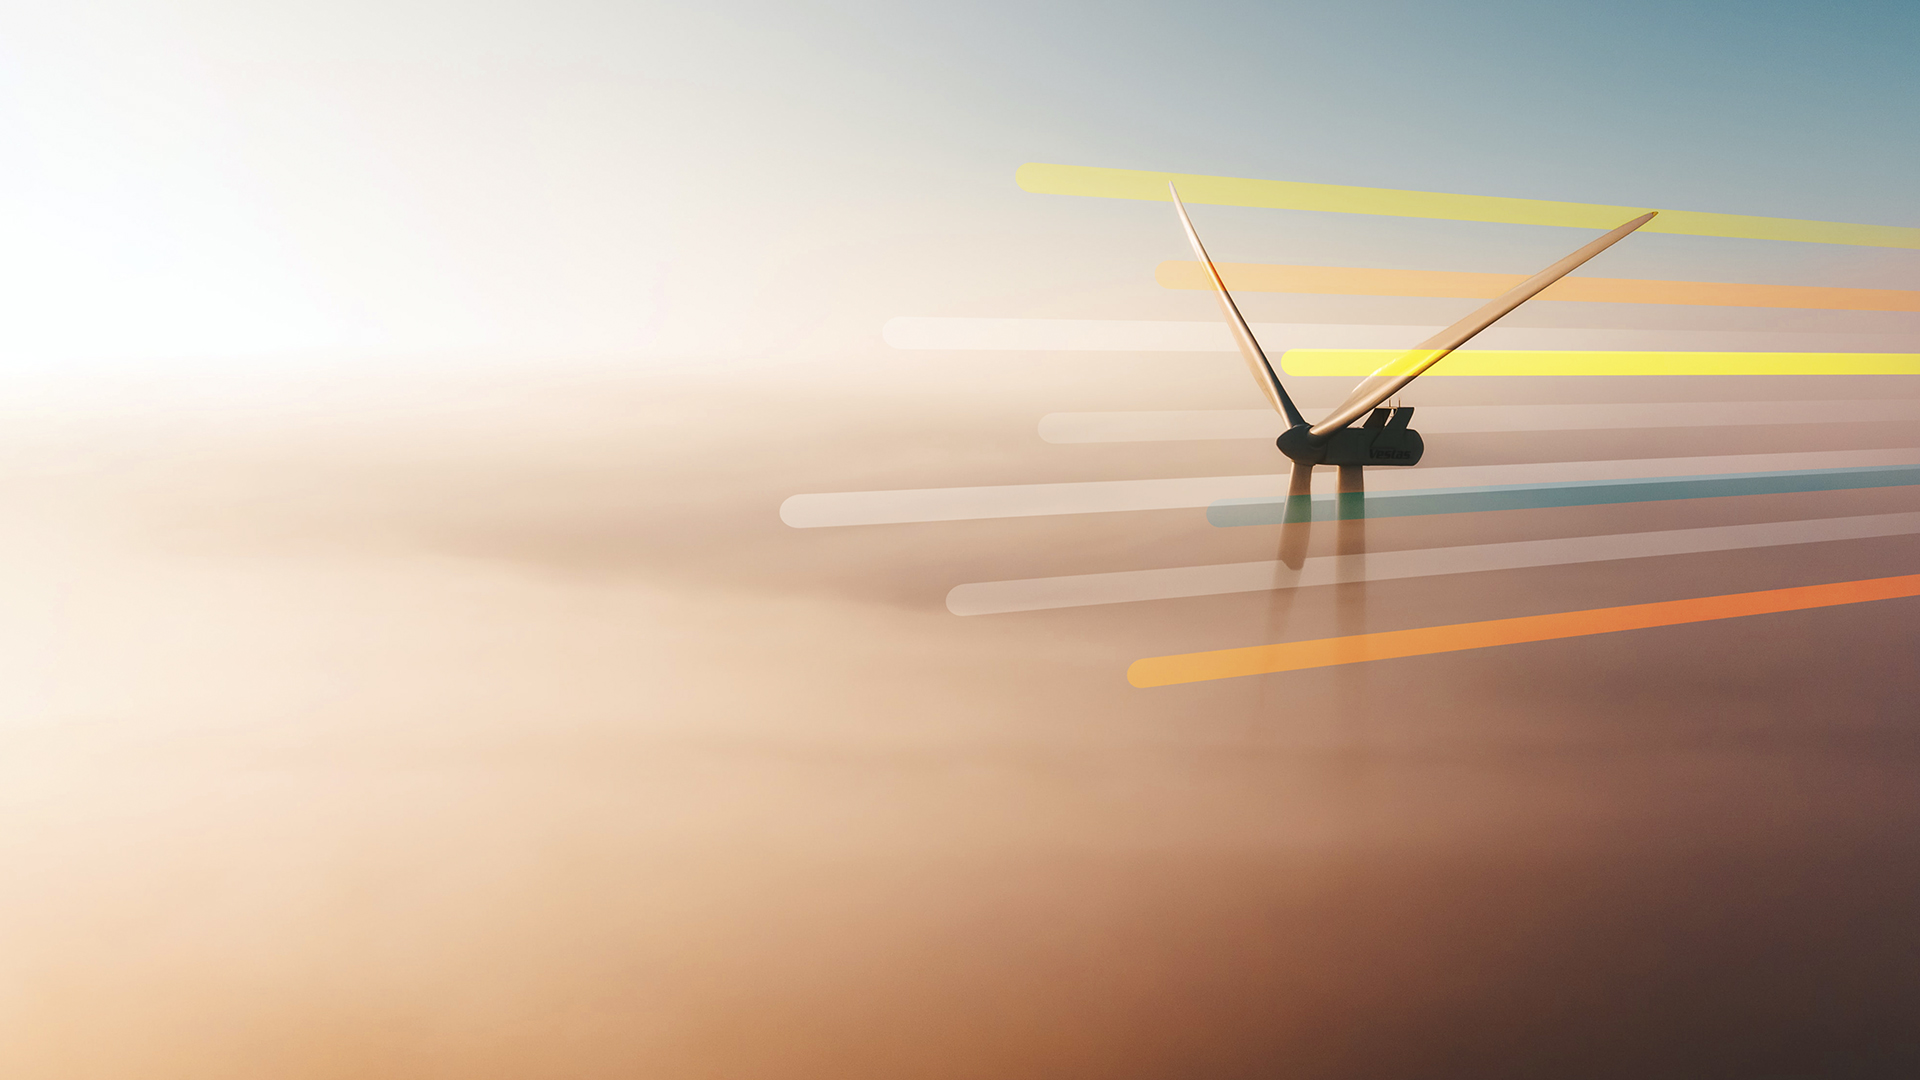 The top of a wind turbine is illuminated by morning light while the rest of the surroundings are obscured by fog.